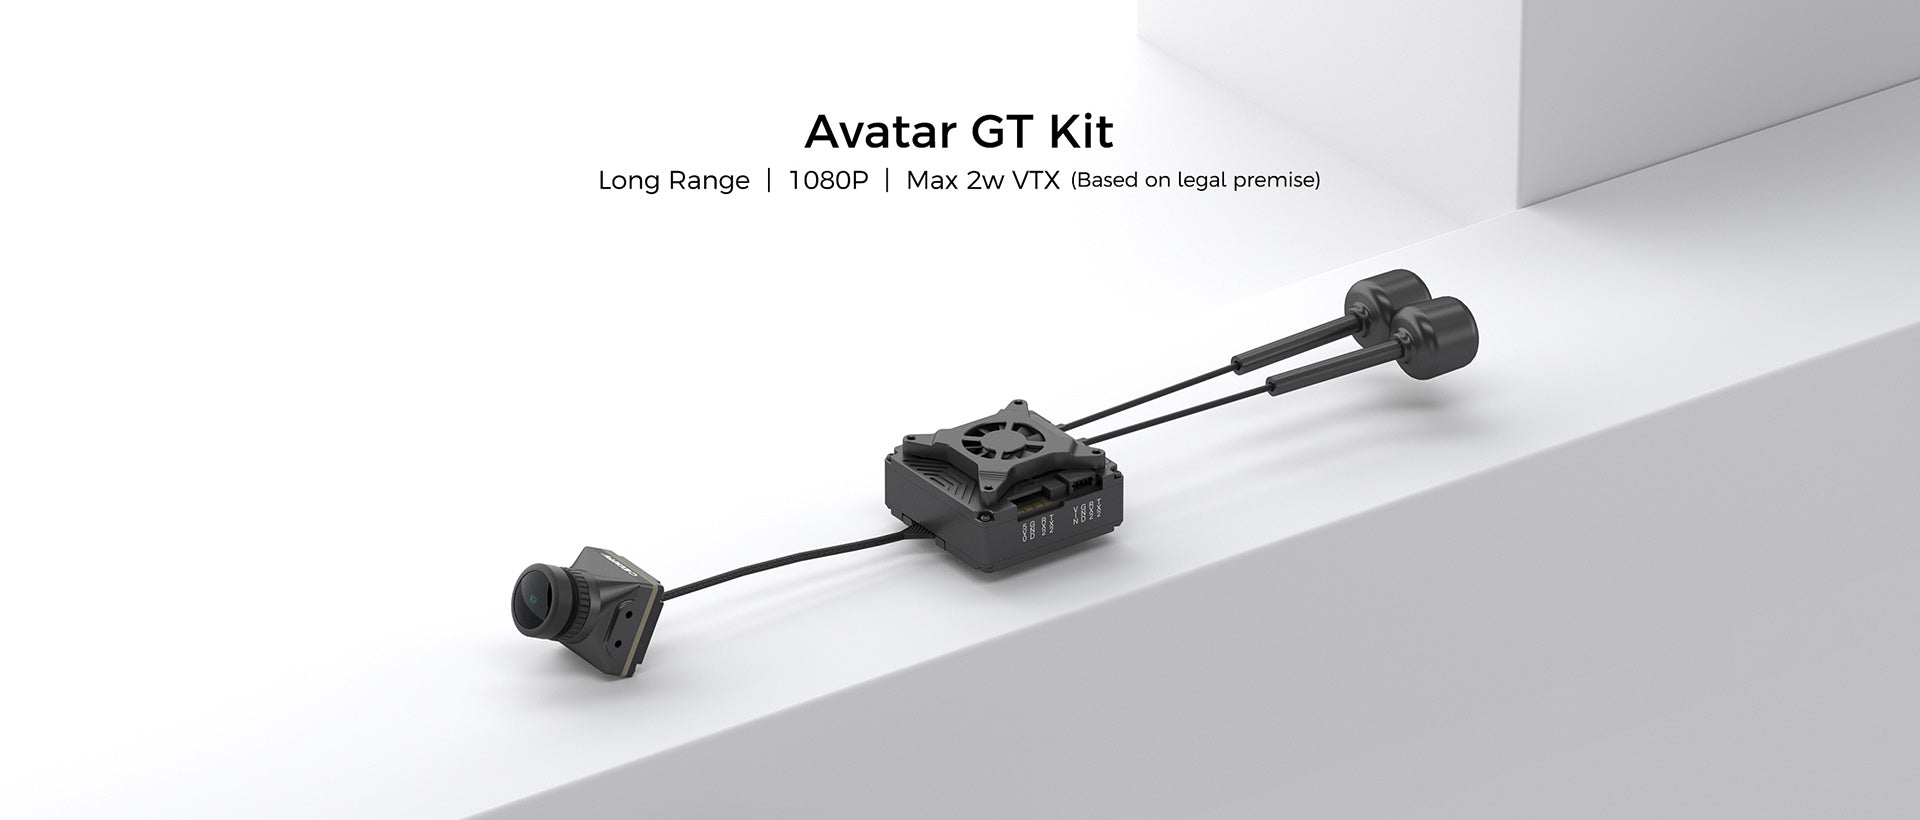 CaddxFPV Walksnail Avatar GT KIT, High-quality camera captures 1080P at 120fps with 2W VTX and supports up to 256GB SD cards.